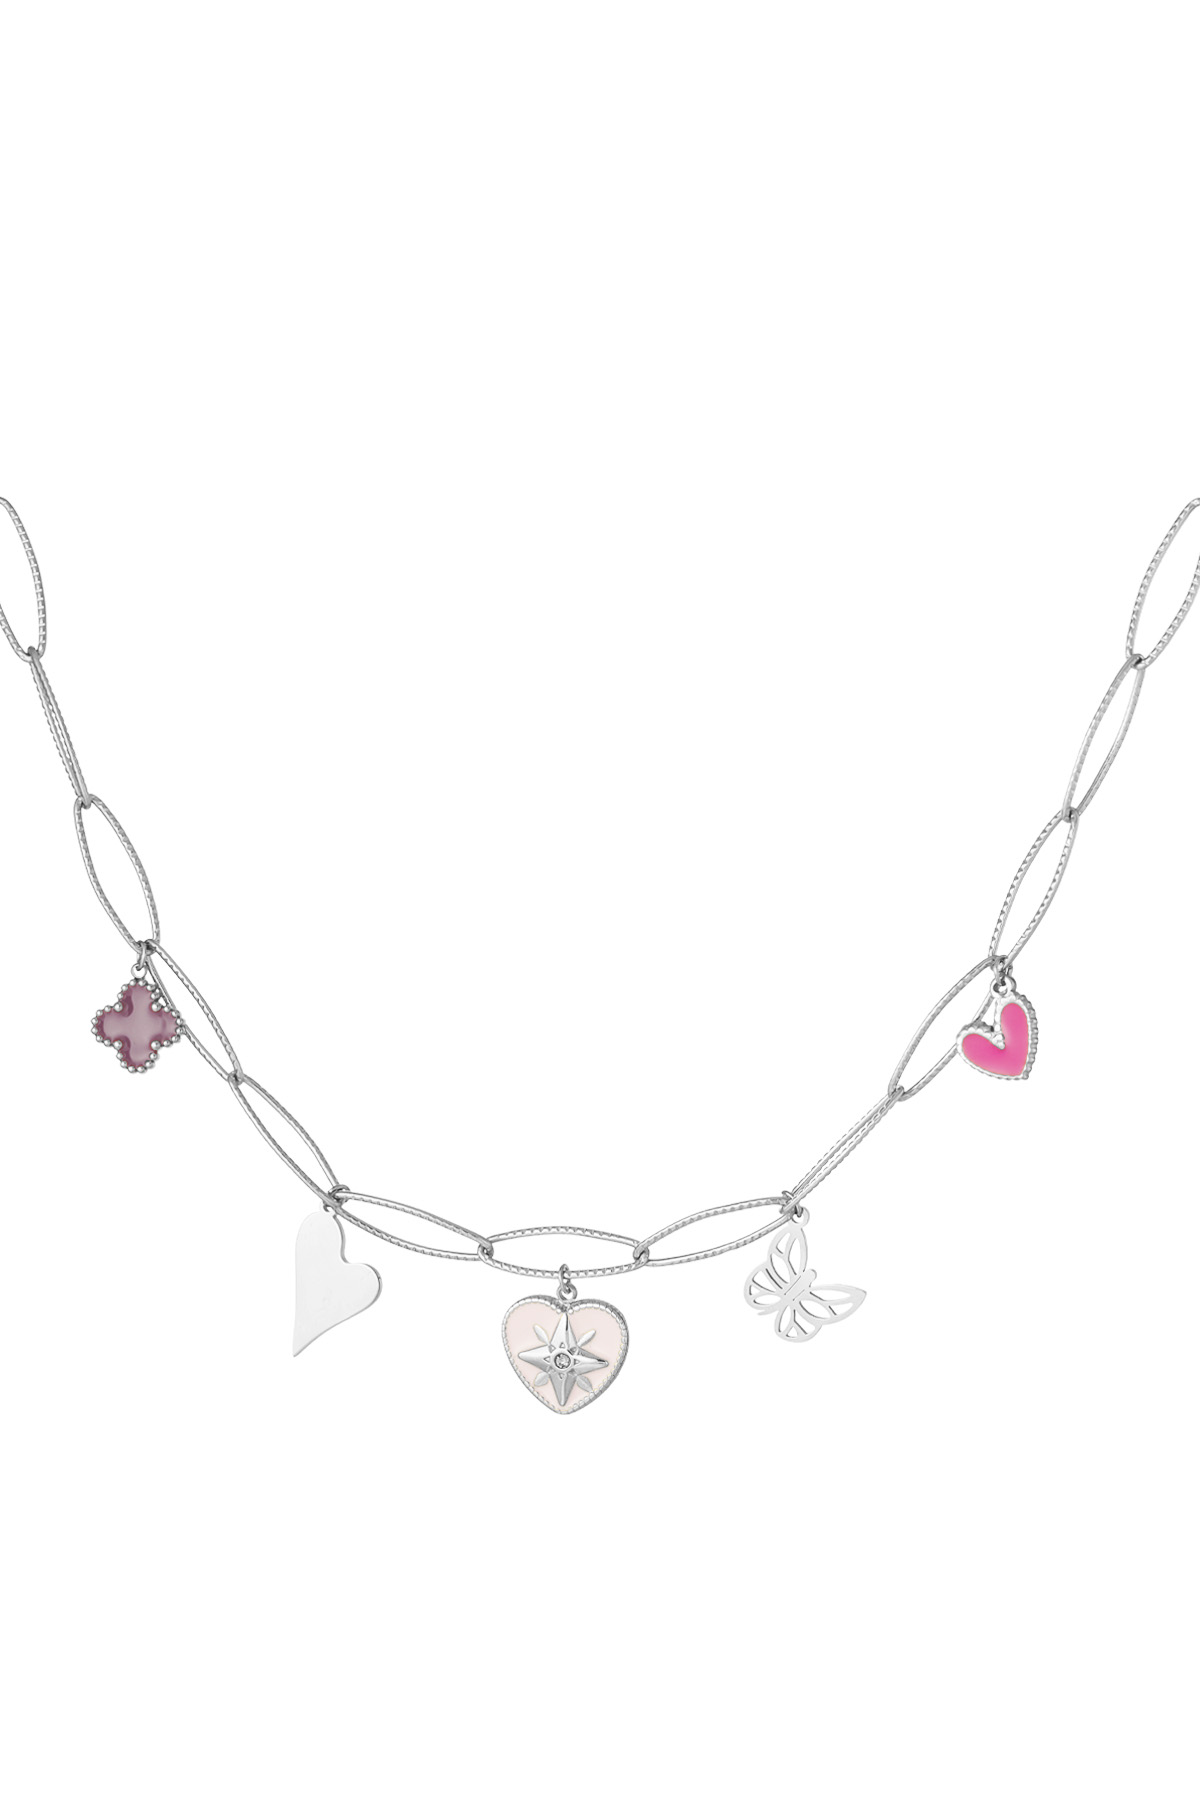 Lovely butterfly charm necklaces - silver